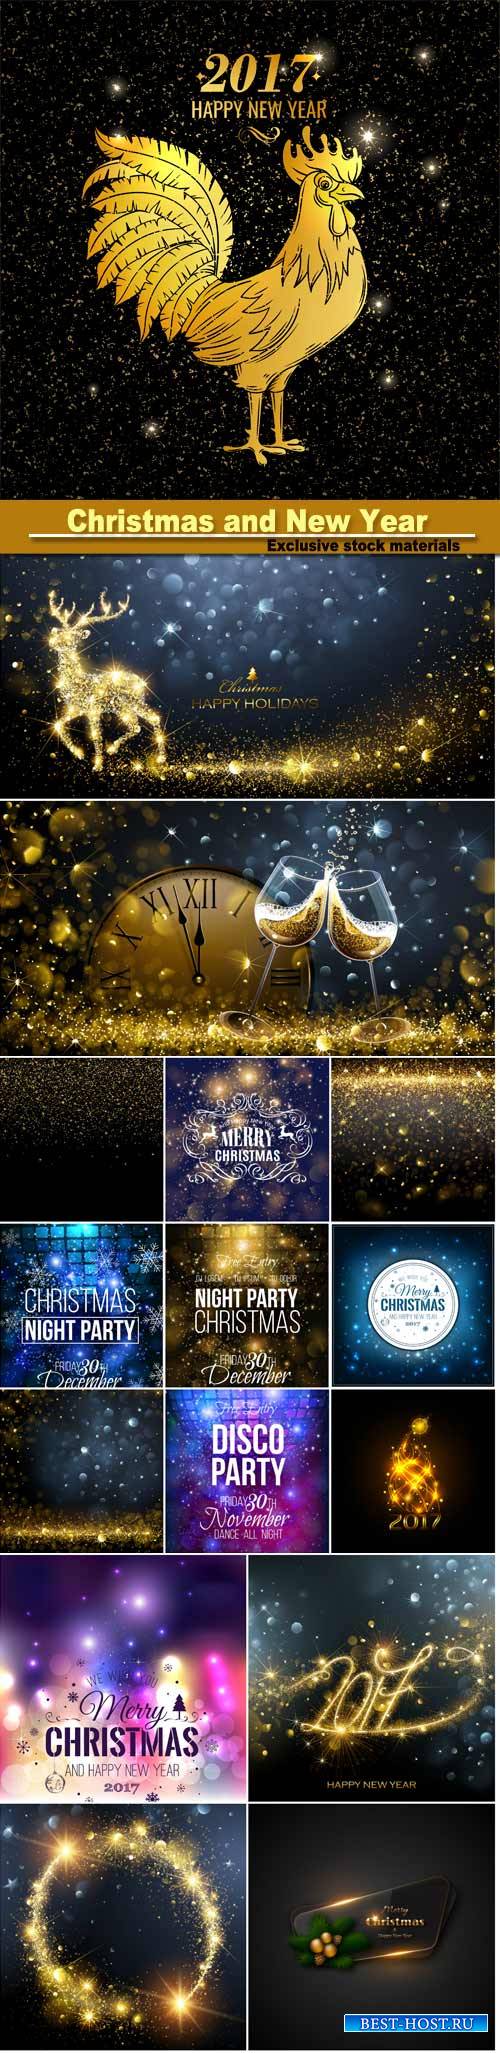 Christmas and New Year background with snowflakes, light, stars, vector illustration